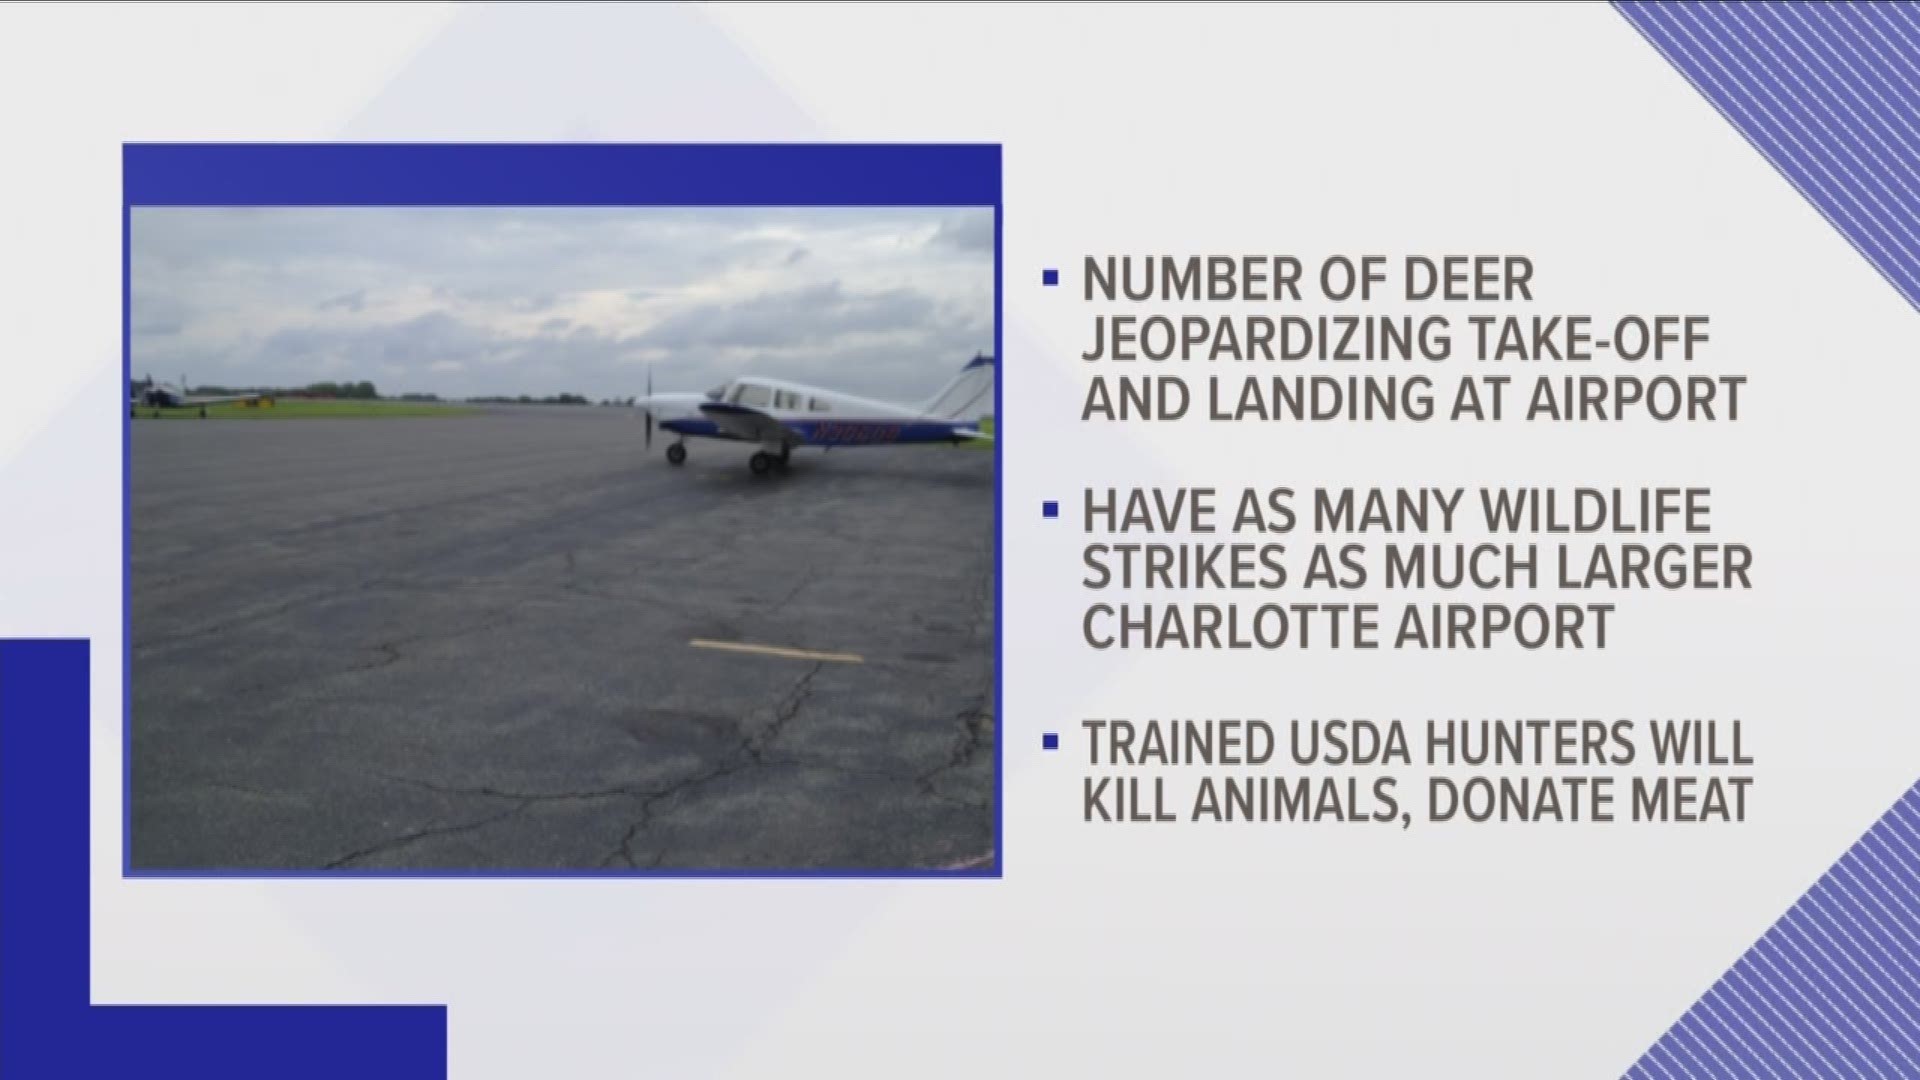 Winston-Salem city council approved a motion to let hunters get rid of deer living near Smith Reynolds Airport.